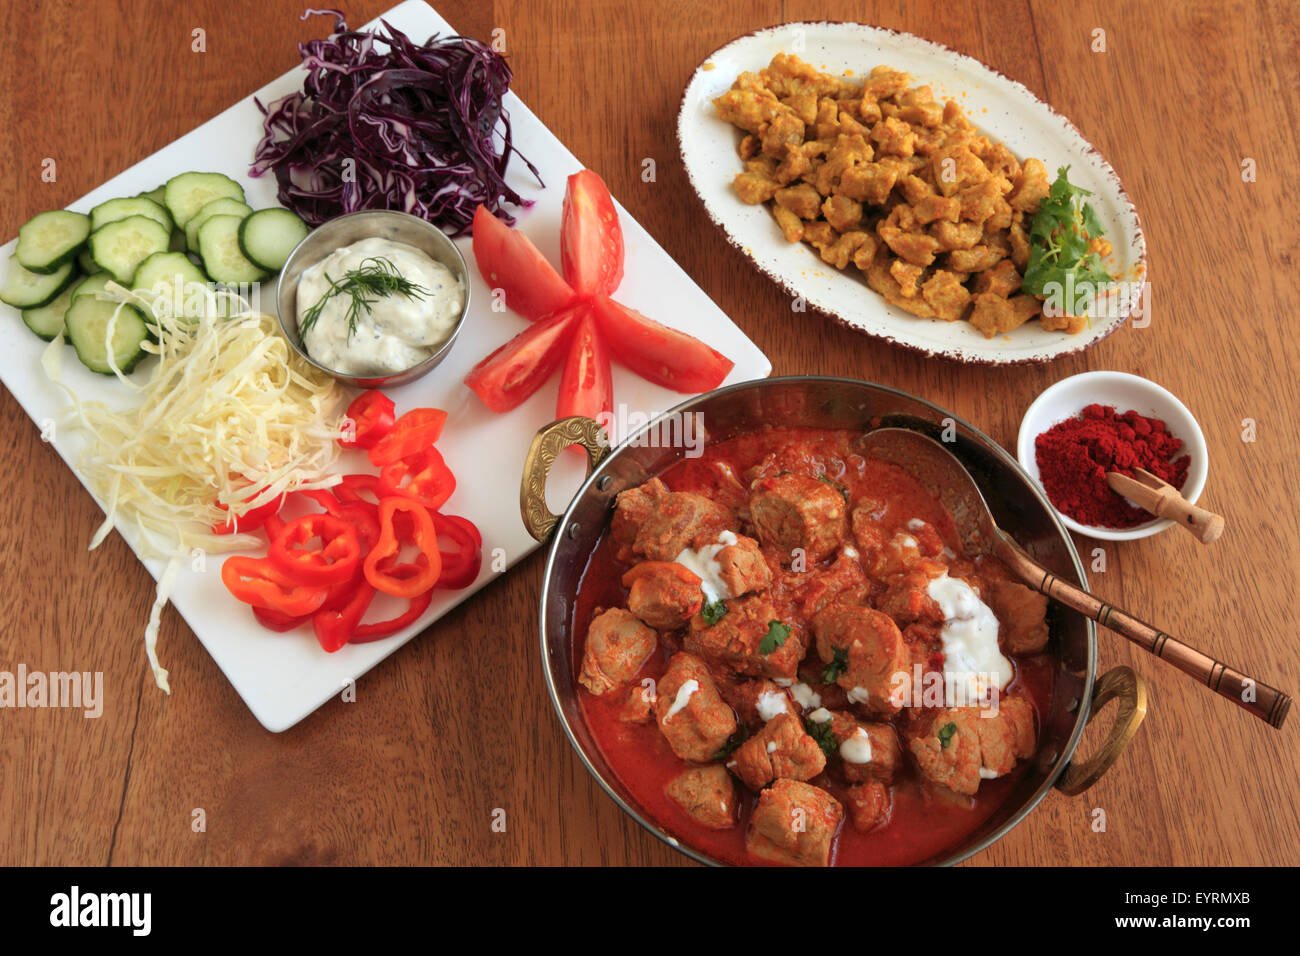 Hungarian food, beef goulash, side dishes, Stock Photo